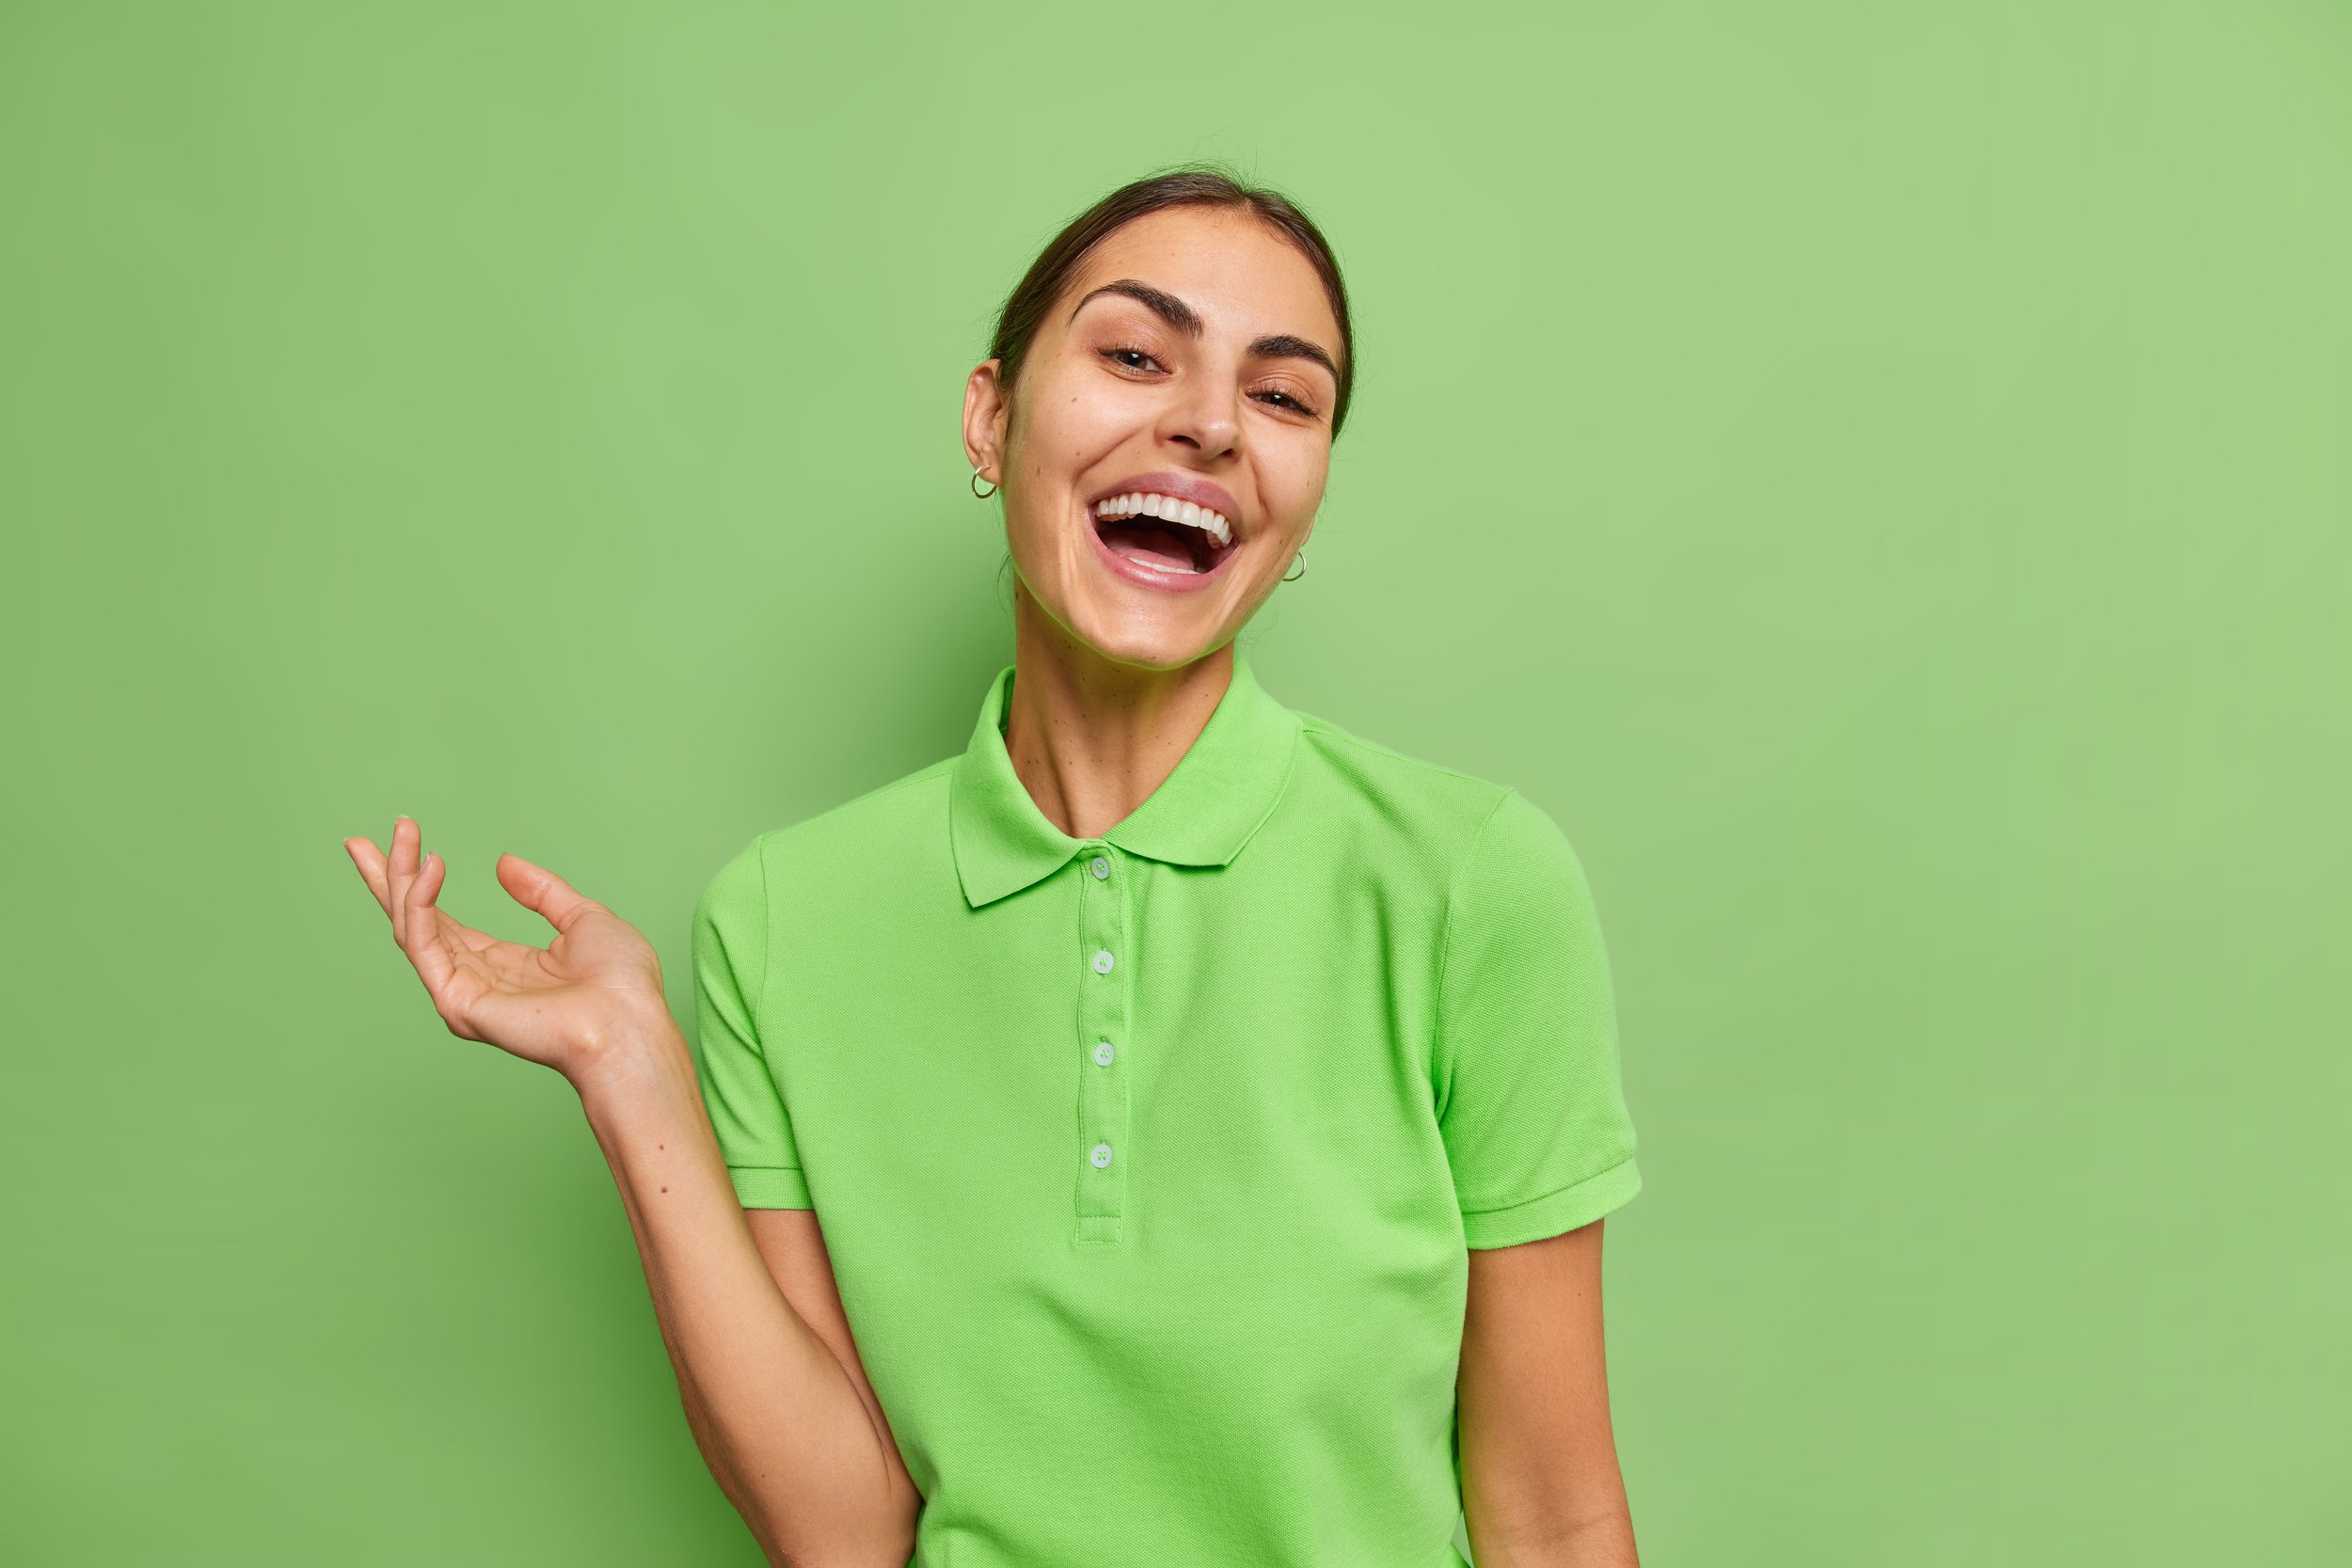 waist-up-shot-happy-brunette-woman-dressed-casual-t-shirt-smiles-sincerely-keeps-arm-raised-laughs-funny-anecdote-wears-casual-t-shirt-isolated-green-background-happiness-concept.jpg